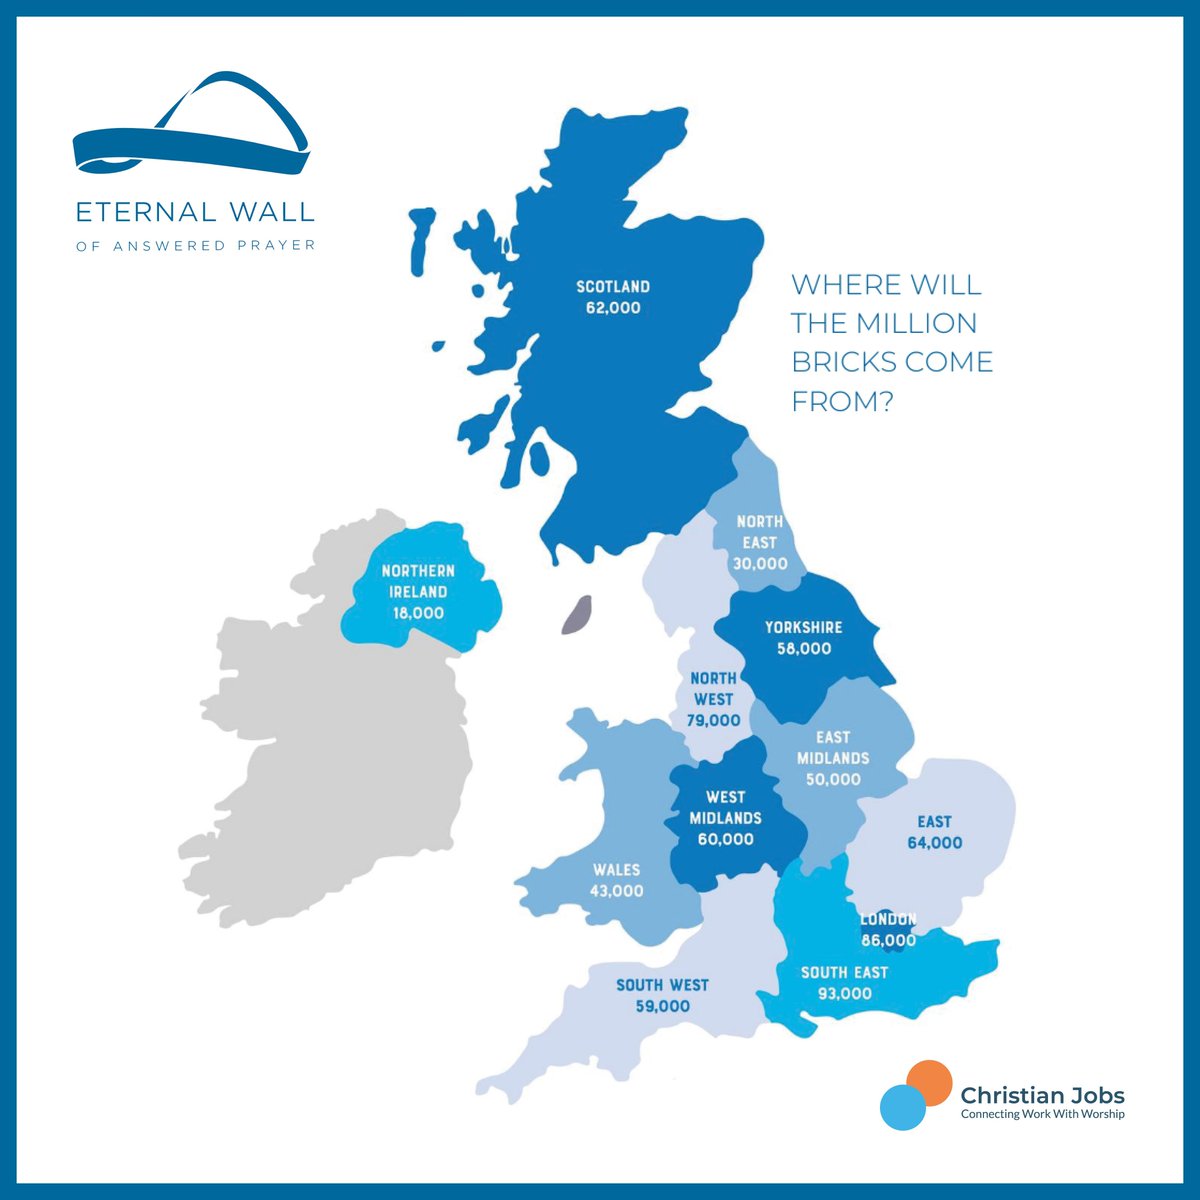 Once completed, @eternalwalluk will be a huge Christian landmark. It will host a million accounts of answered prayer, making it the largest database of hope stories in the world. You can find out more at buff.ly/3DAz5UG #UKChristianJobs #MakeHopeVisible